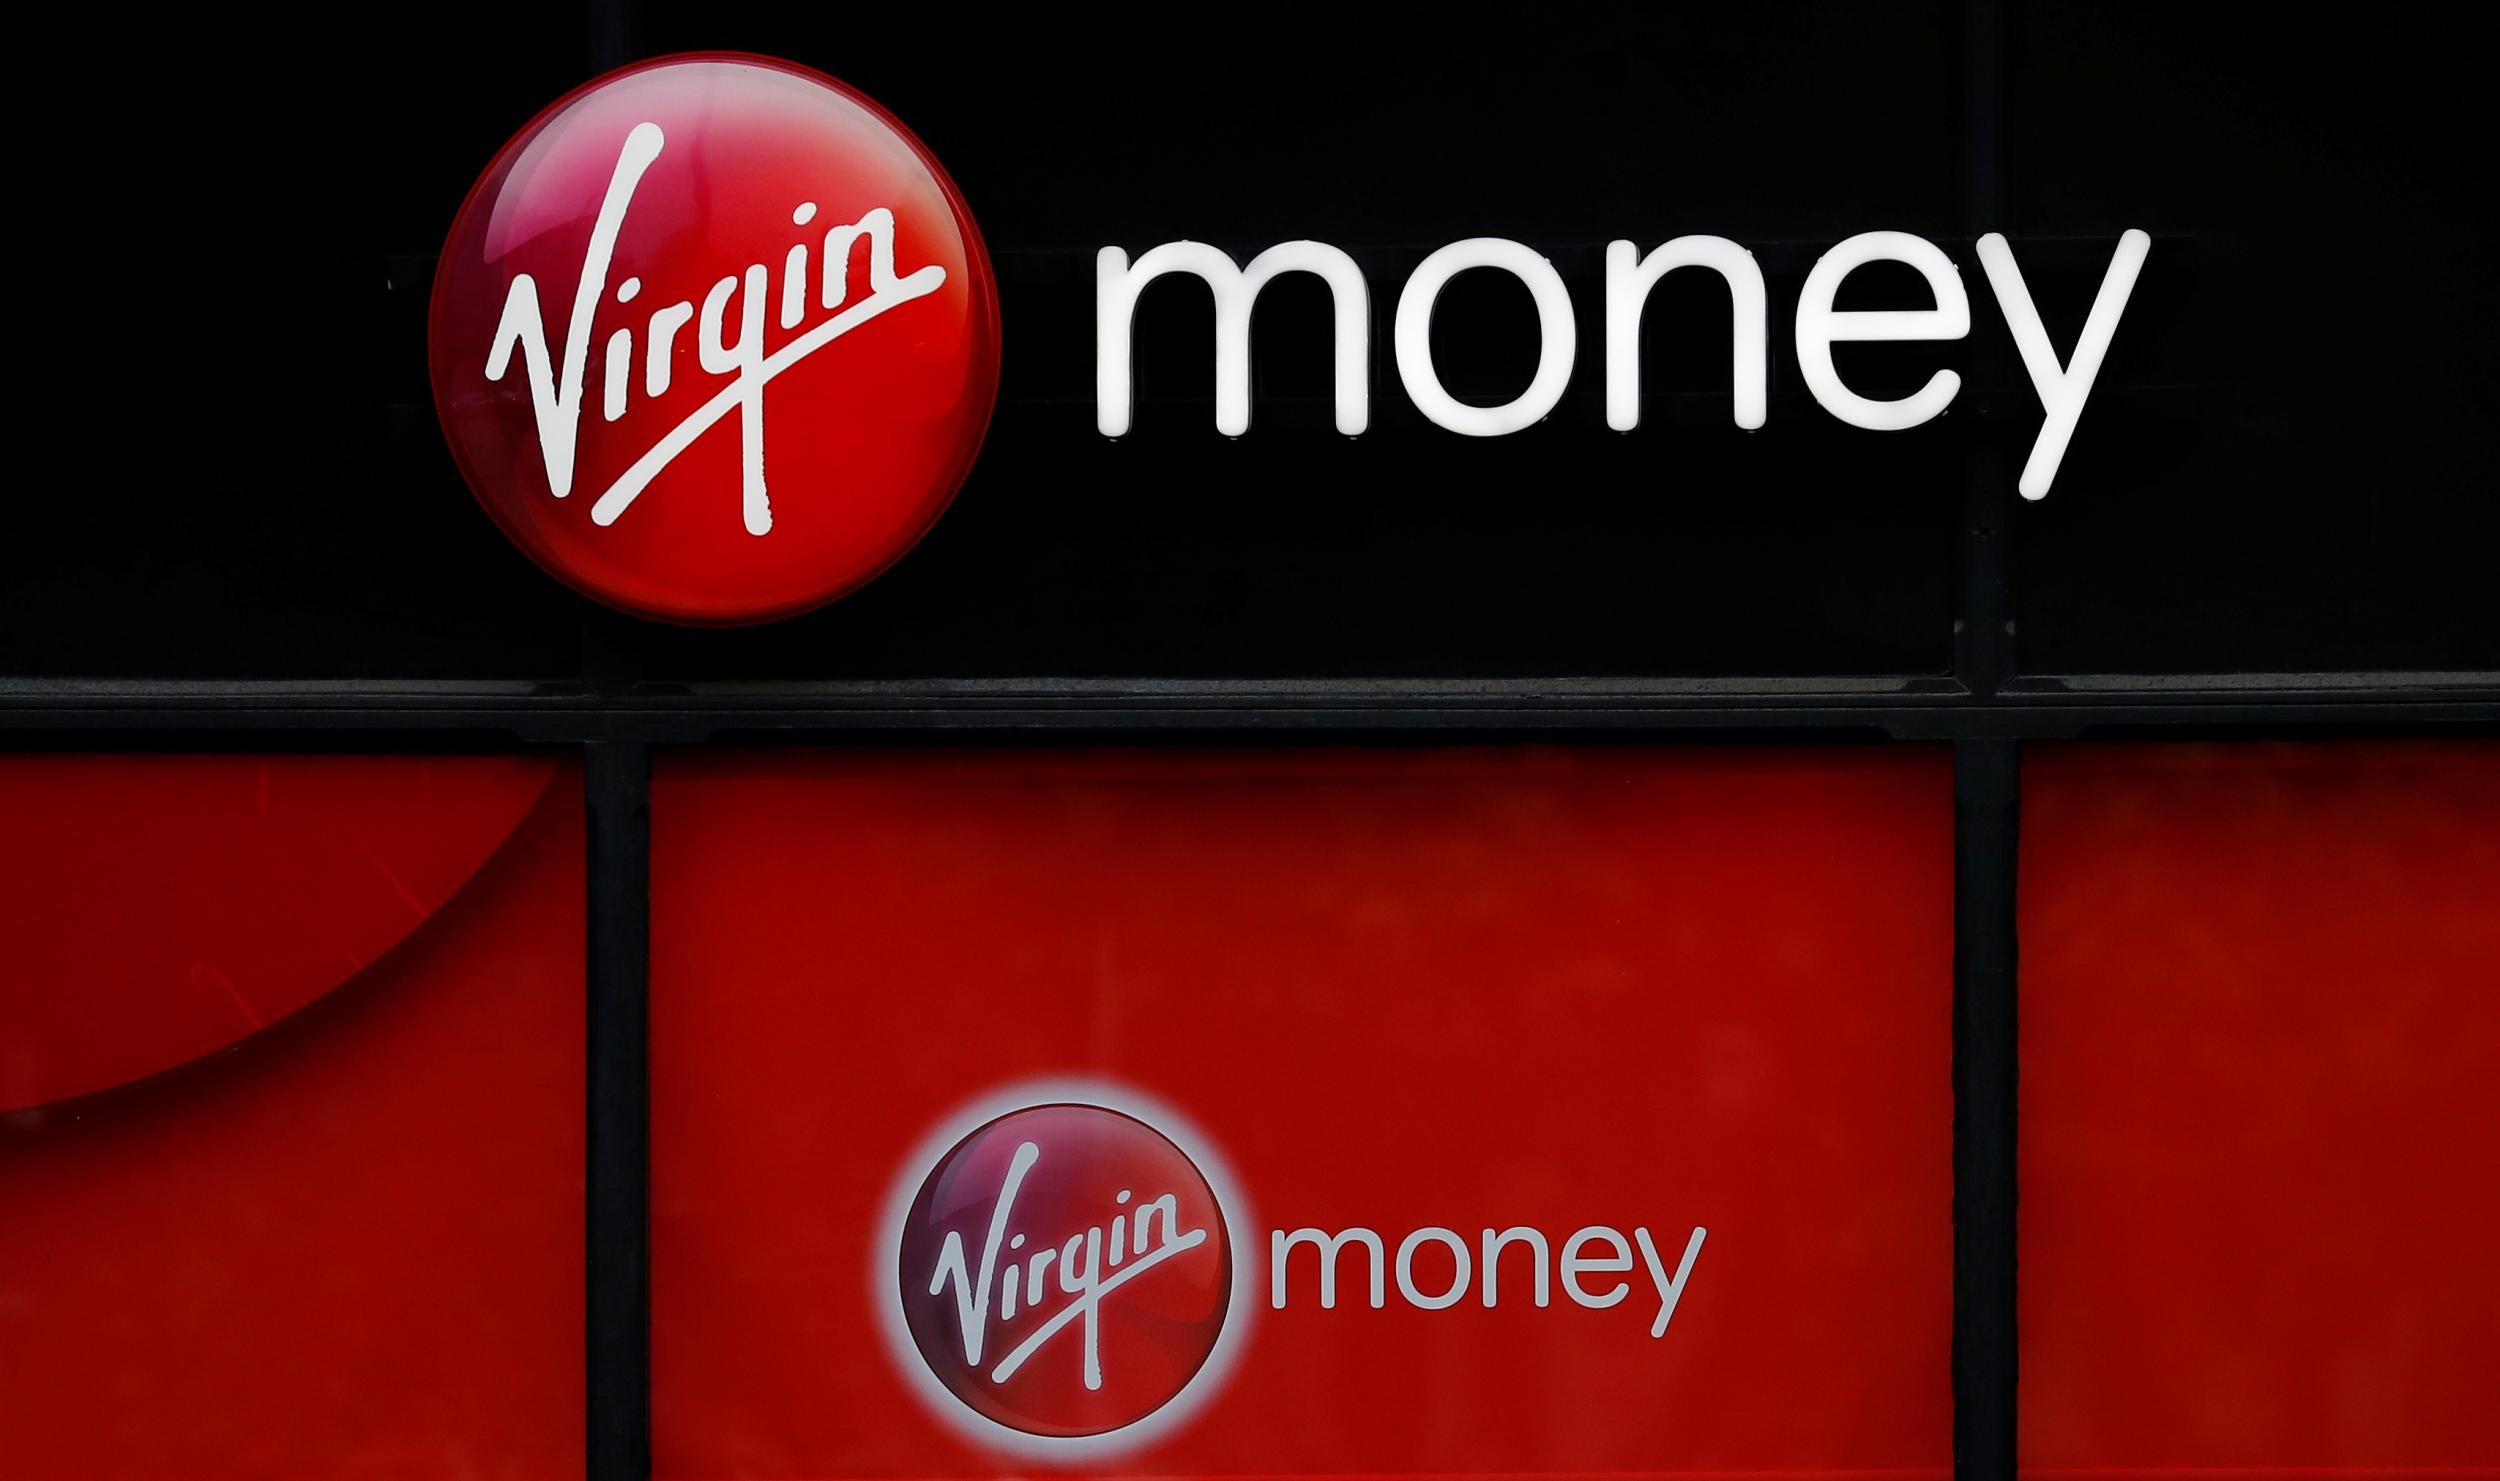 Virgin Money has been approached by rival CYBG